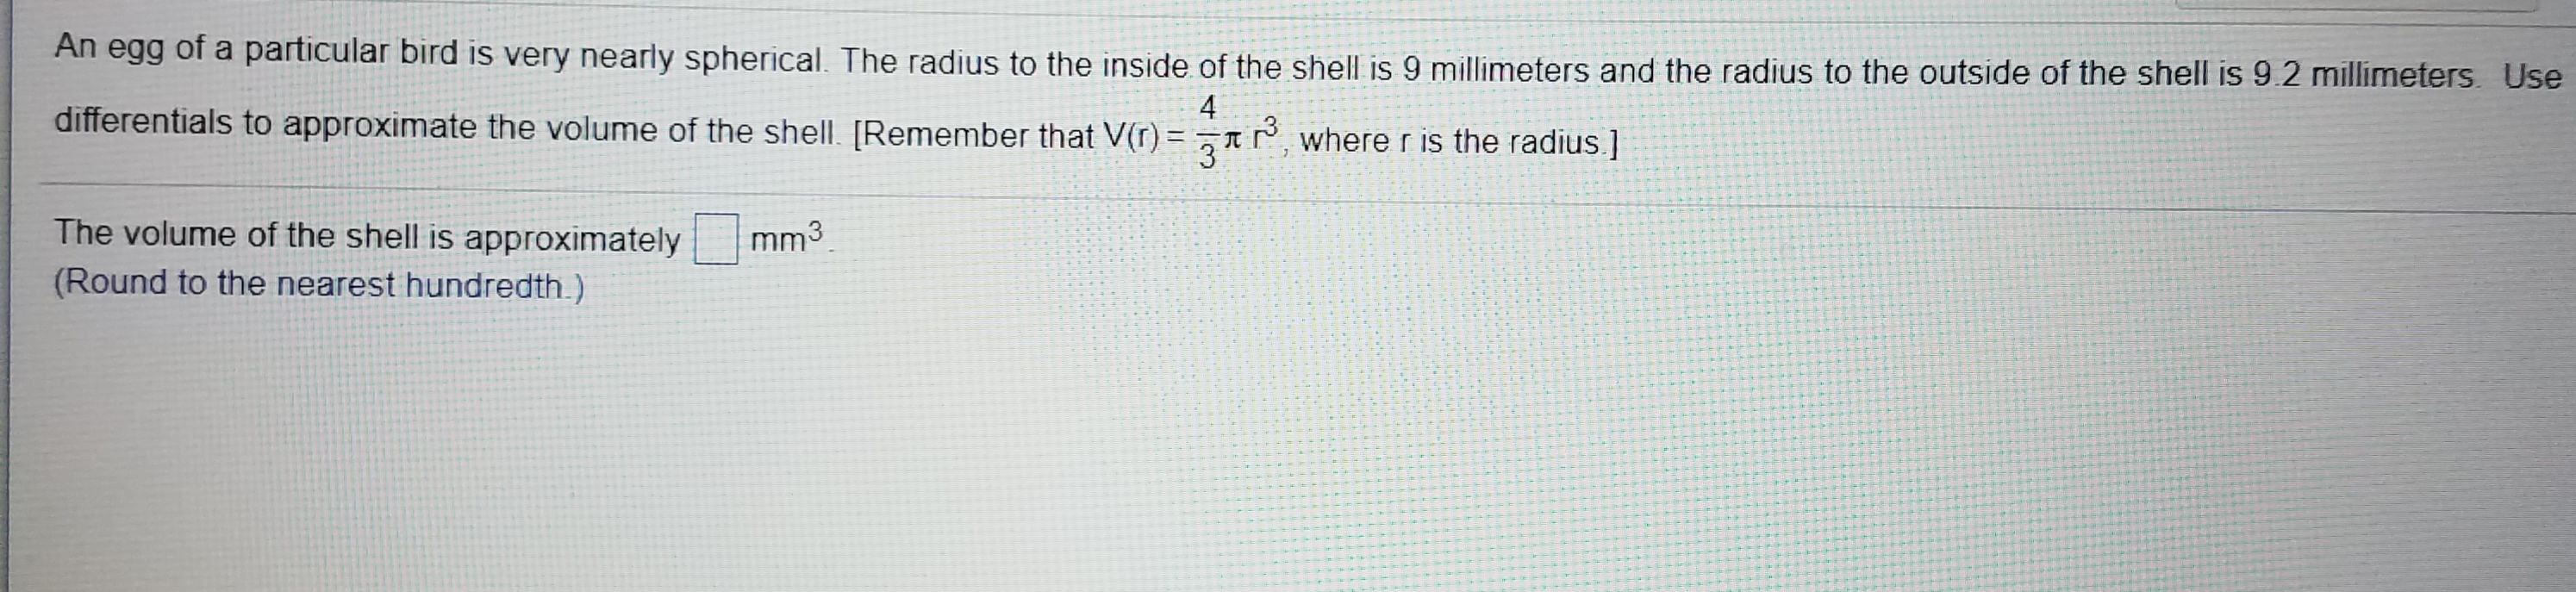 An egg of a particular bird is very nearly spherical. The radius to the inside of the shell is 9 millimeters and the radius to the outside of the shell is 9 2 millimeters. Use
4
differentials to approximate the volume of the shell. [Remember that V(r) = zrrwhere r is the radius.]
The volume of the shell is approximately
mm3
(Round to the nearest hundredth.)
